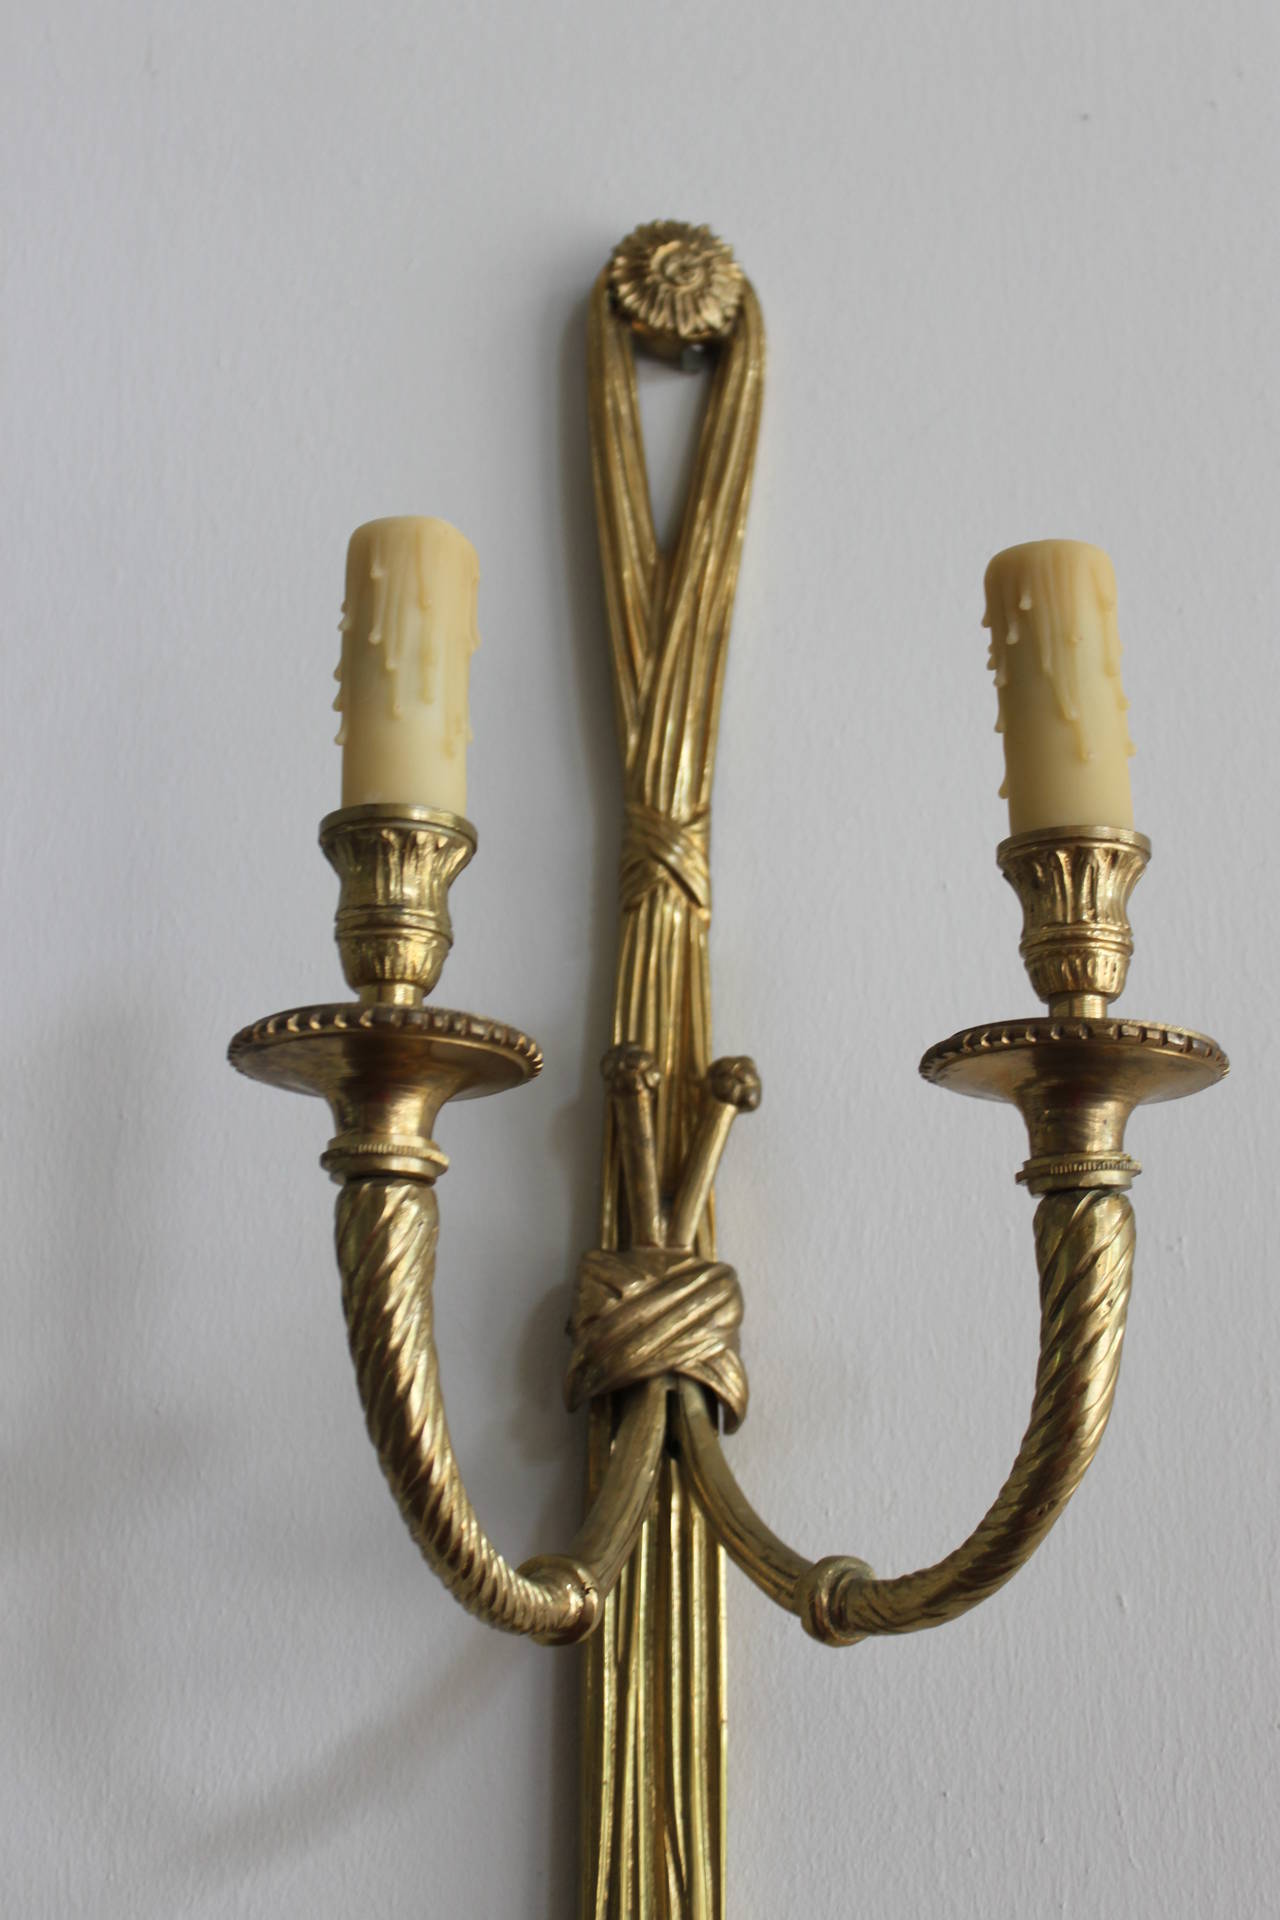 Pair of French brass neoclassic sconces each with two arms with looped tassel trim detail.